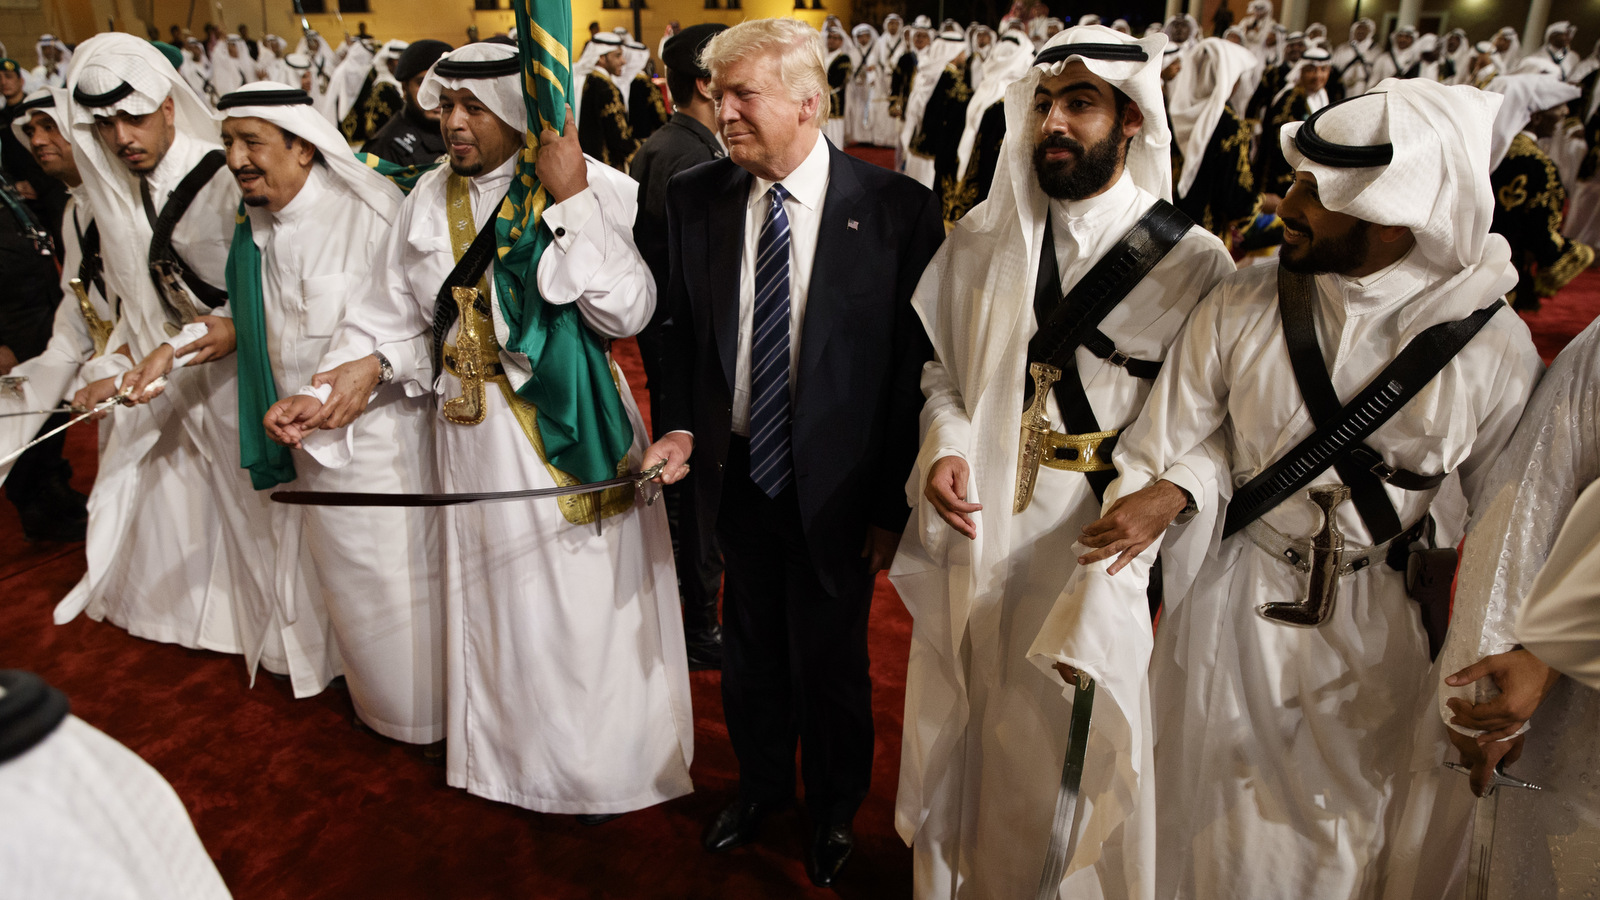 Donald Trump holds a sword and sways with traditional dancers during a welcome ceremony at Murabba Palace, in Riyadh, May 20, 2017. (AP/Evan Vucci)